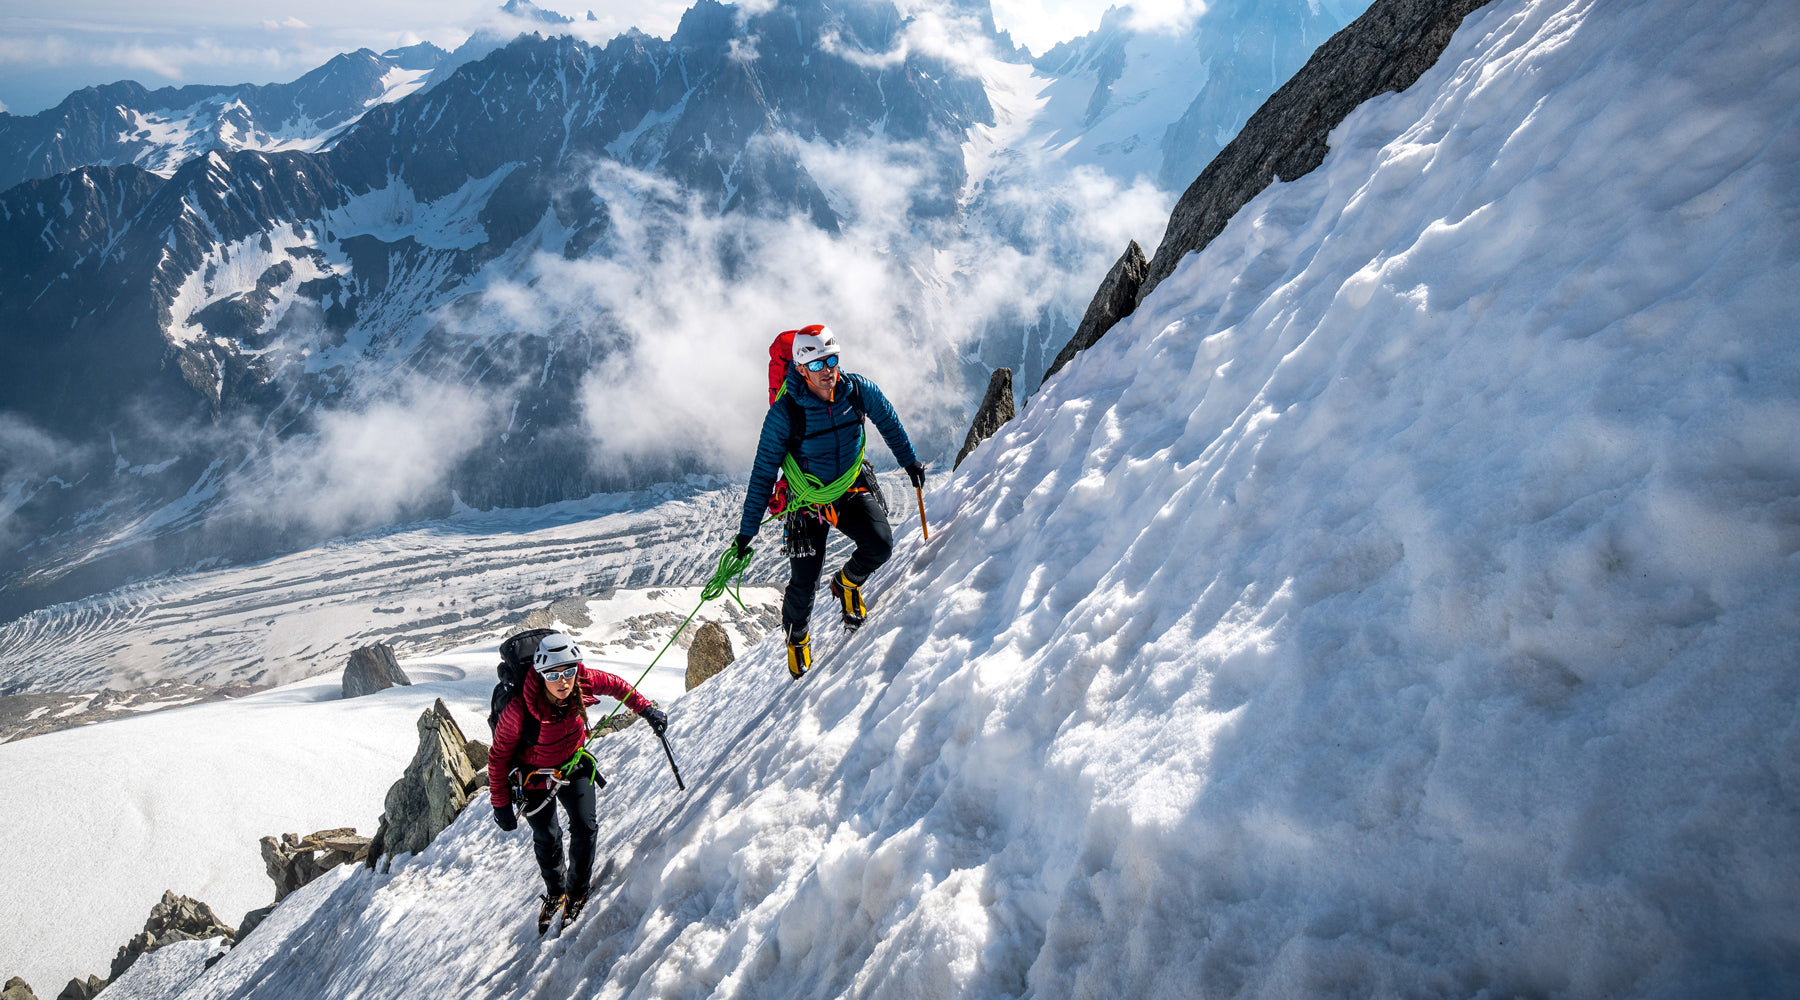 David Garnier and Marie Gamen on the north face of the Petite Aiguille Verte Mont Blanc Lines Alex Buisse